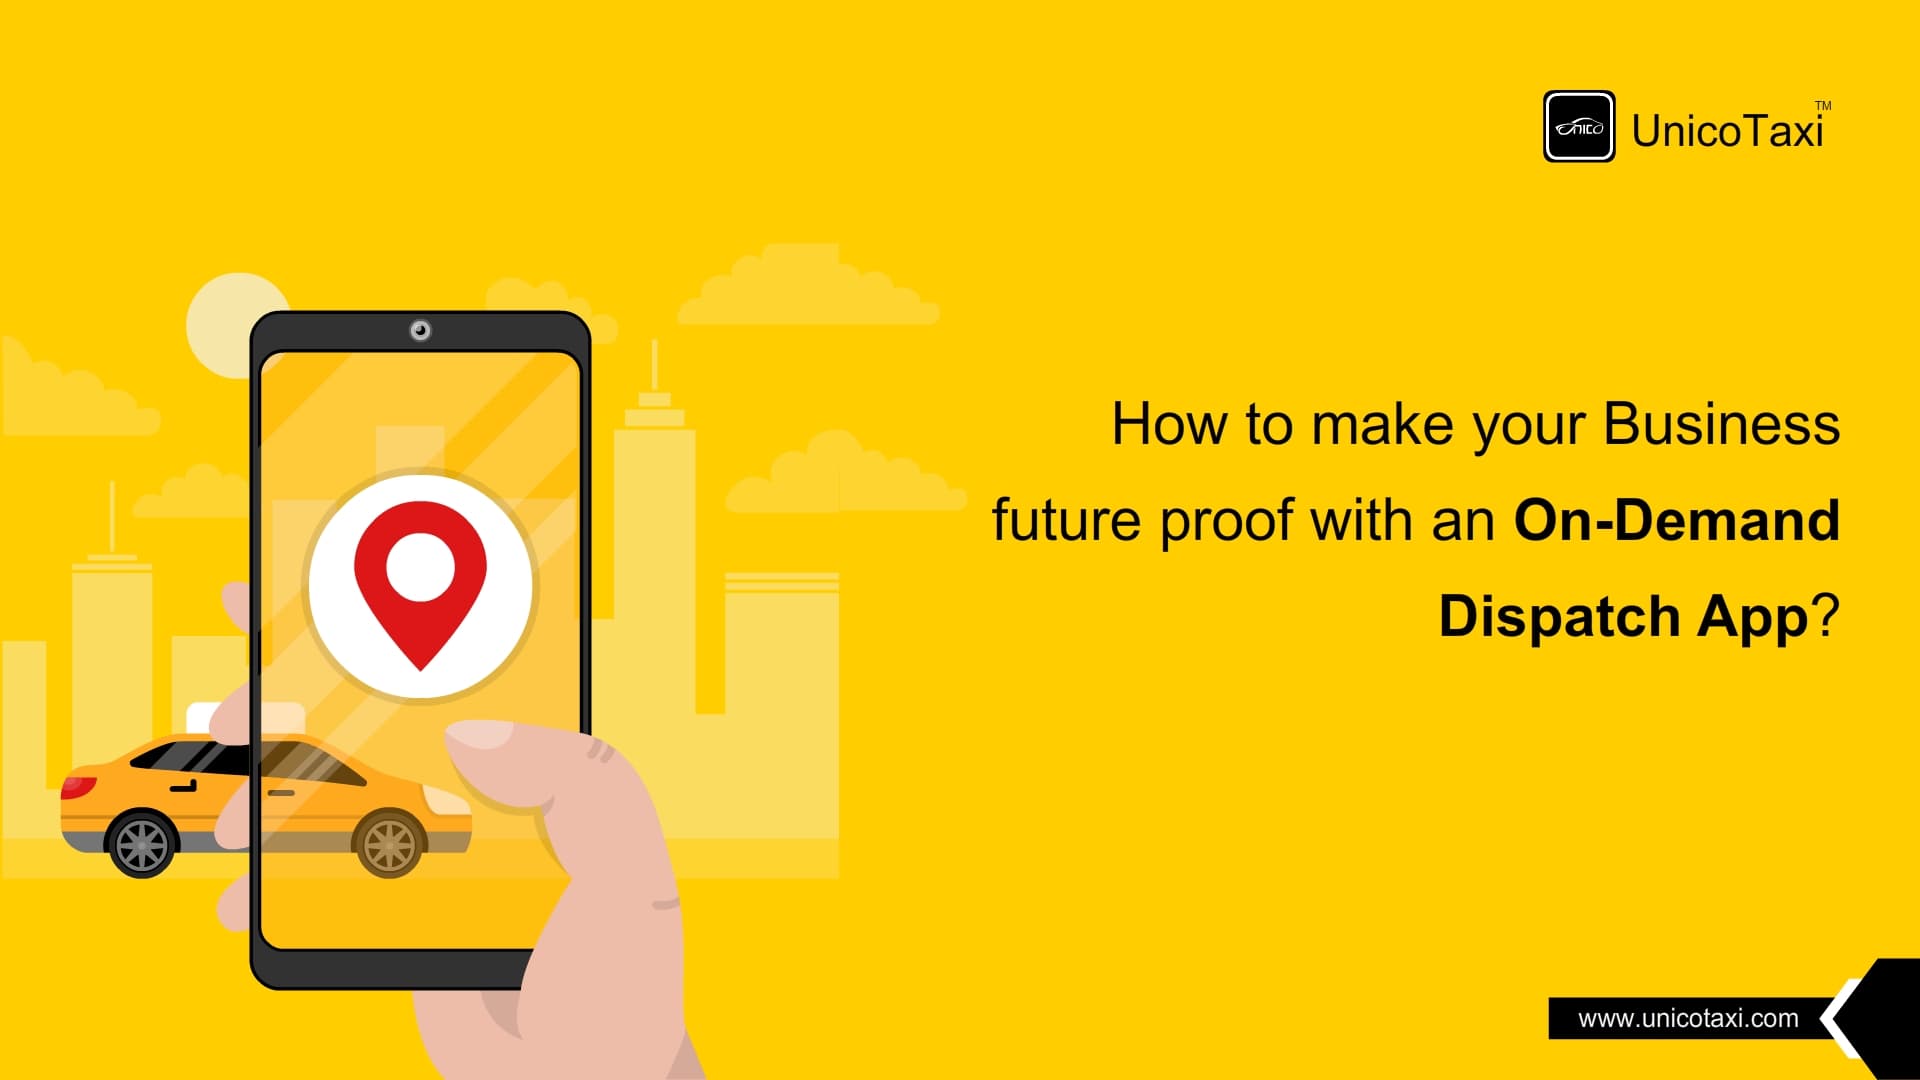 How To Make Your Business Future Proof With an On-Demand Dispatch App?